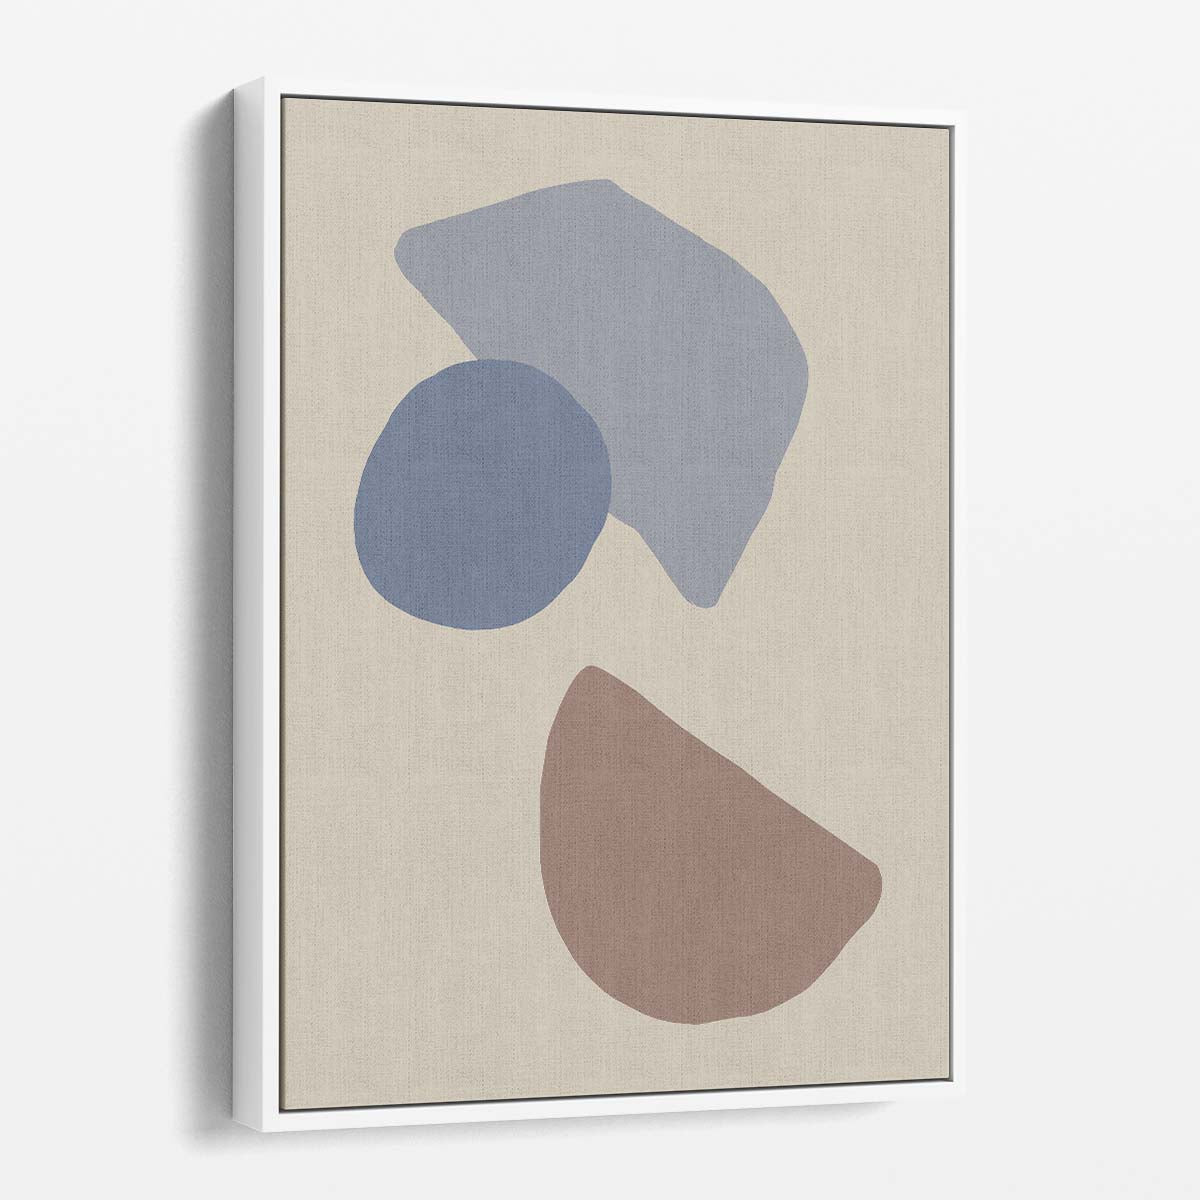 Minimalist Beige Geometric Illustration, Abstract Organic Shapes Wall Art by Luxuriance Designs, made in USA